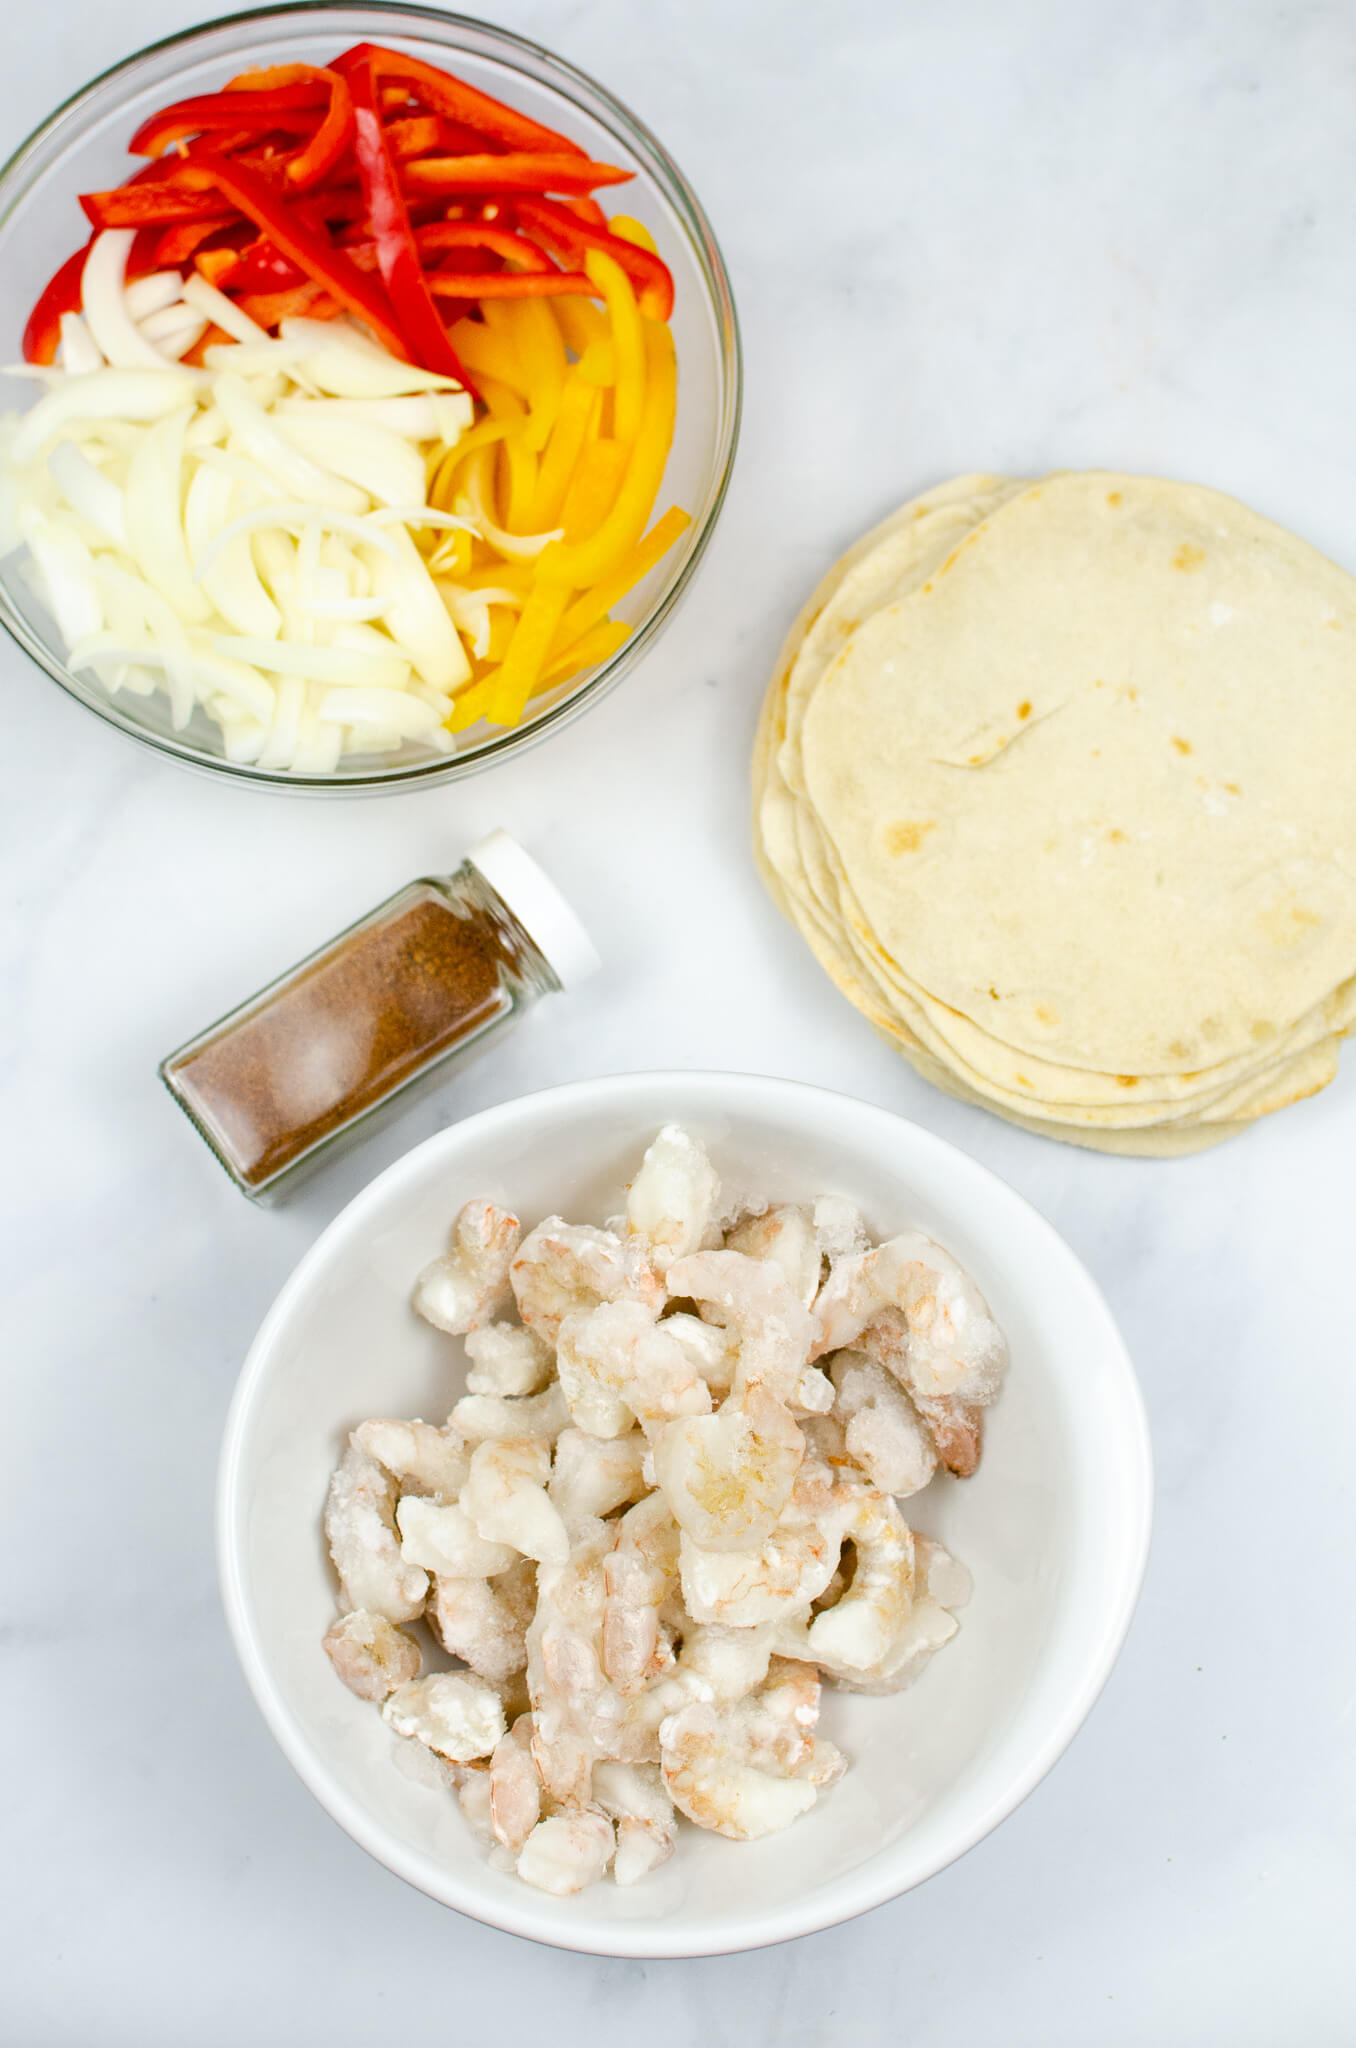 Ingredients for shrimp fajitas including raw shrimp, sliced bell peppers, onions, spices, and tortillas on a baking sheet.